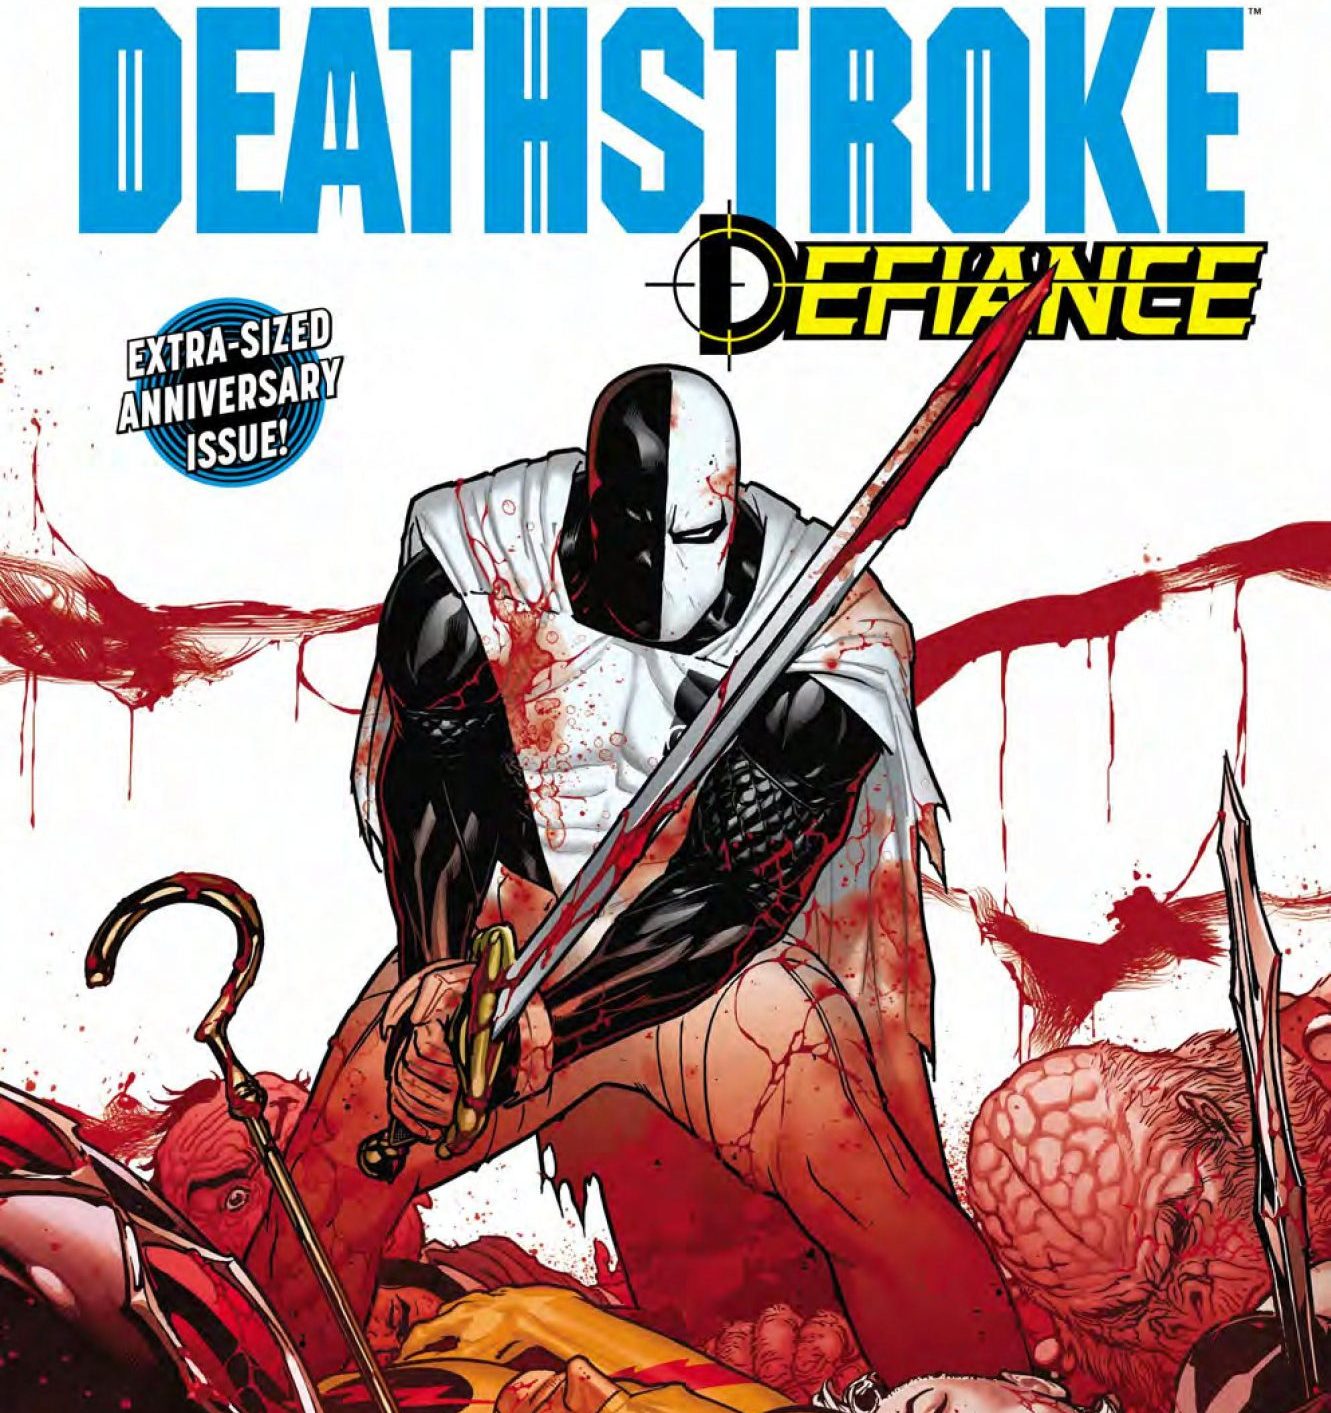 Deathstroke #25 Review: The Philosophy of Evil